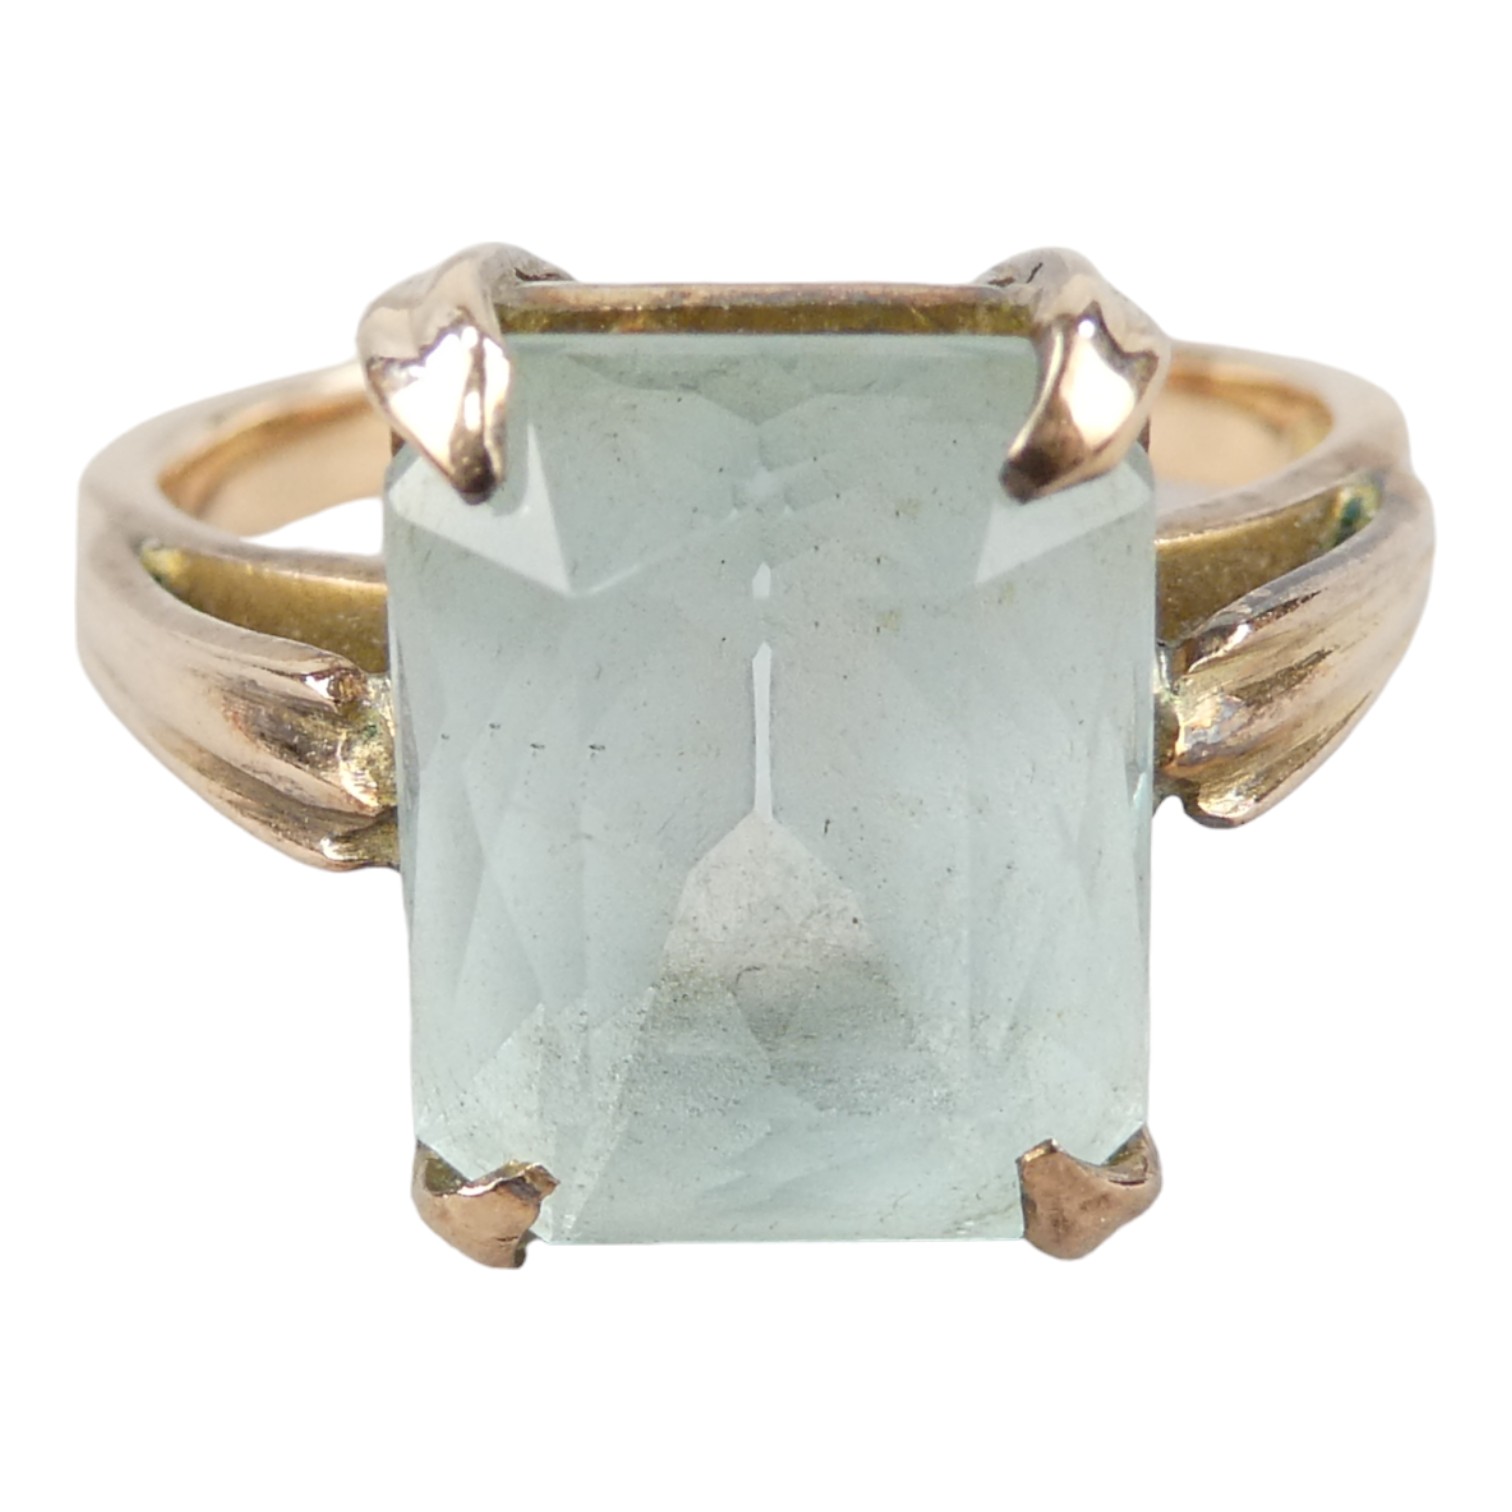 A 15ct gold ring - claw set with an emerald cut light blue stone, size O, weight 4.8g.